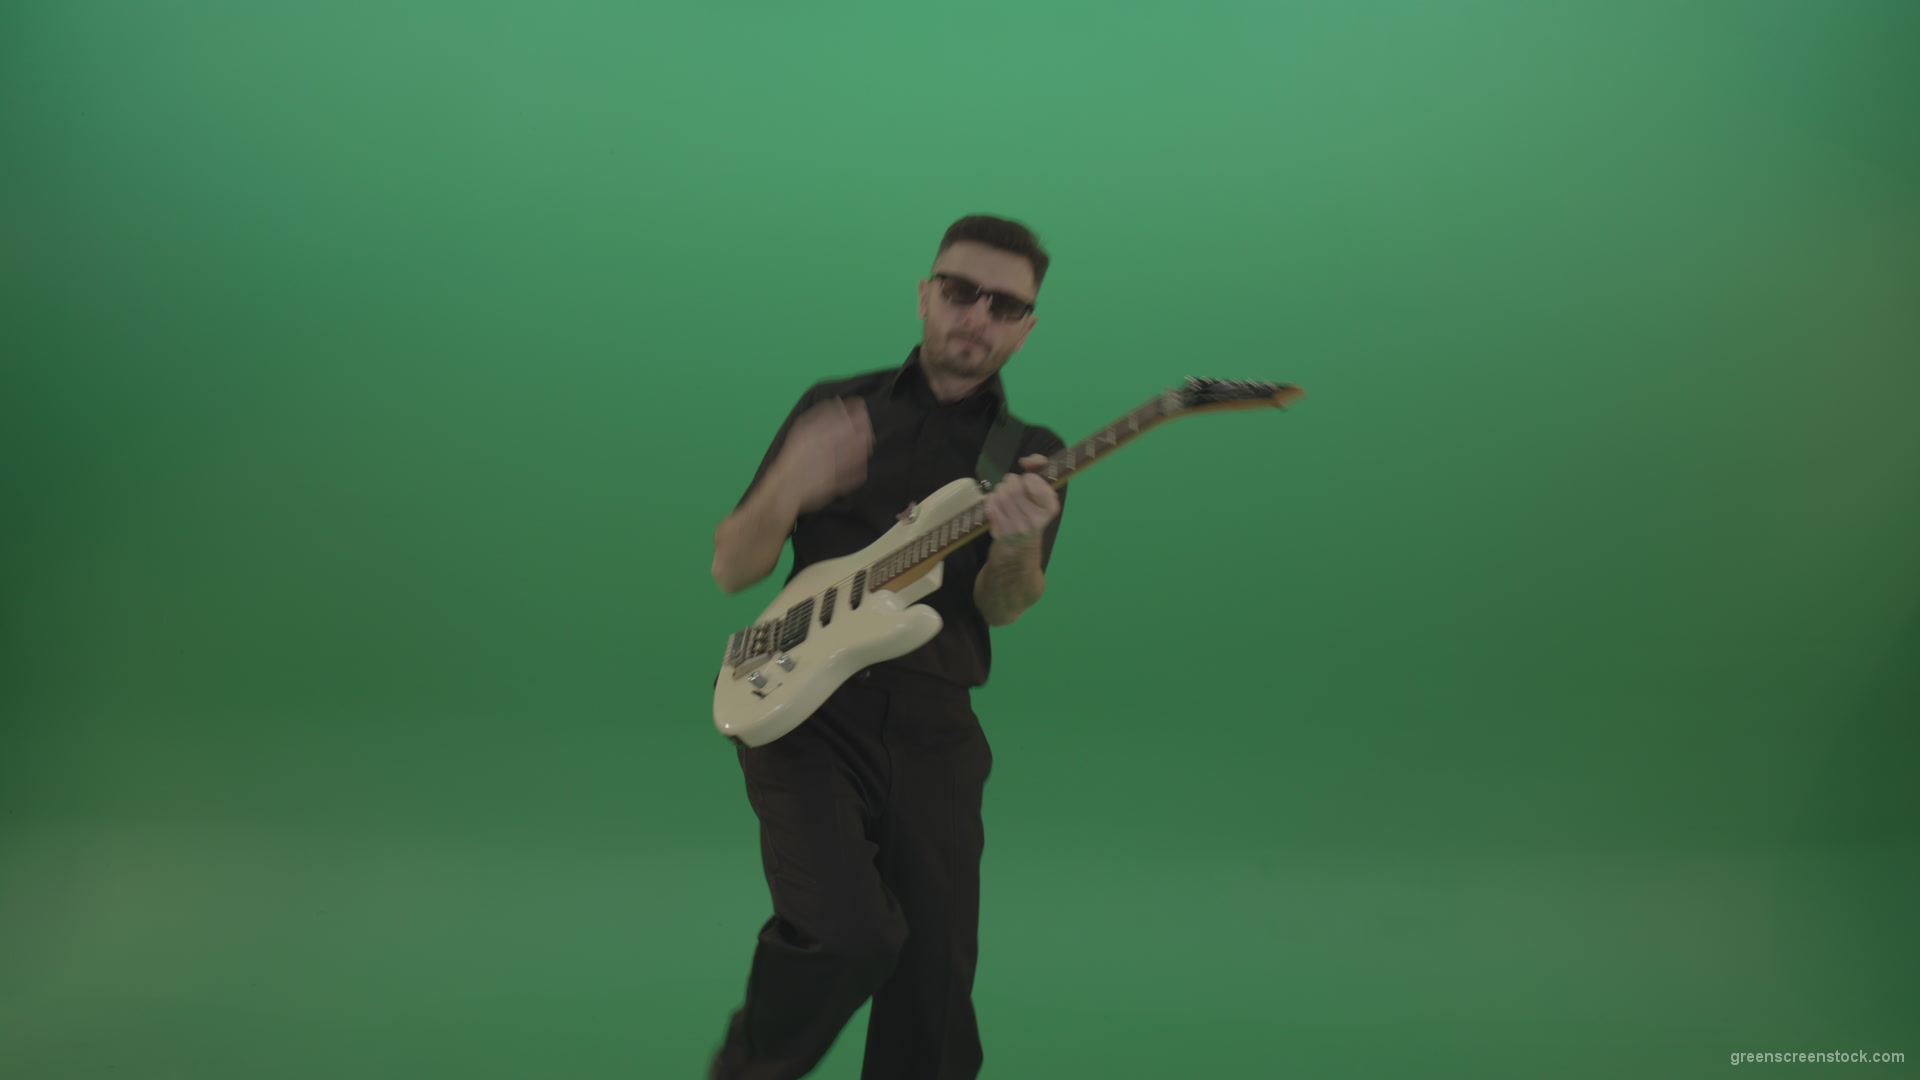 Man-in-black-costume-virtuoso-play-white-electro-rythm-guitar-isolated-on-green-screen_002 Green Screen Stock